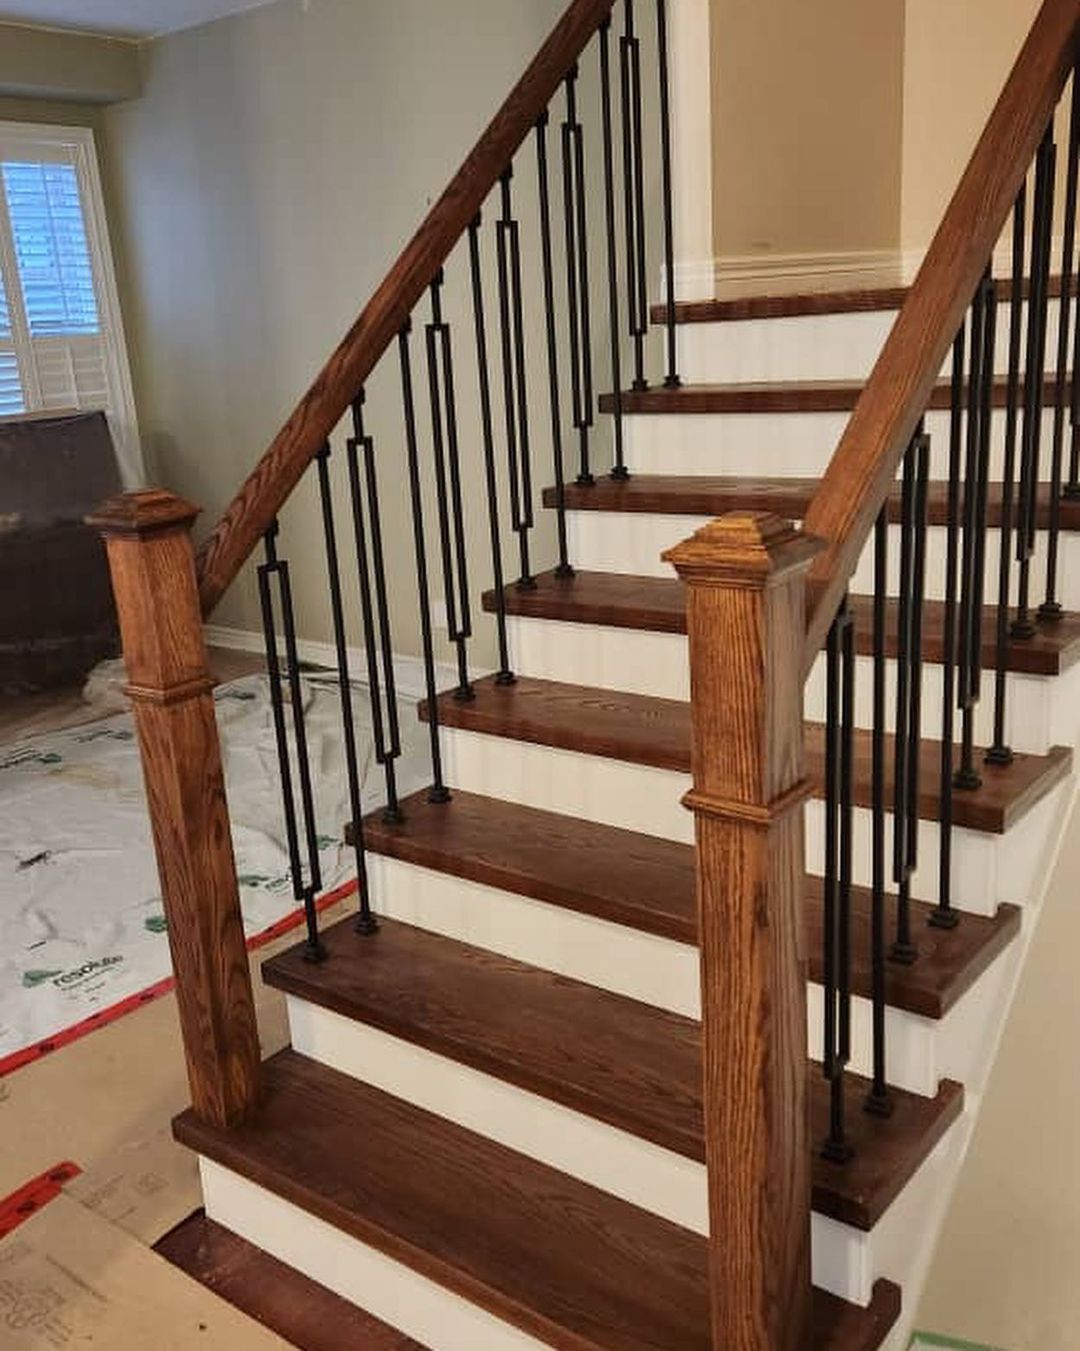 Renovation of the wooden flooring of stair and railing